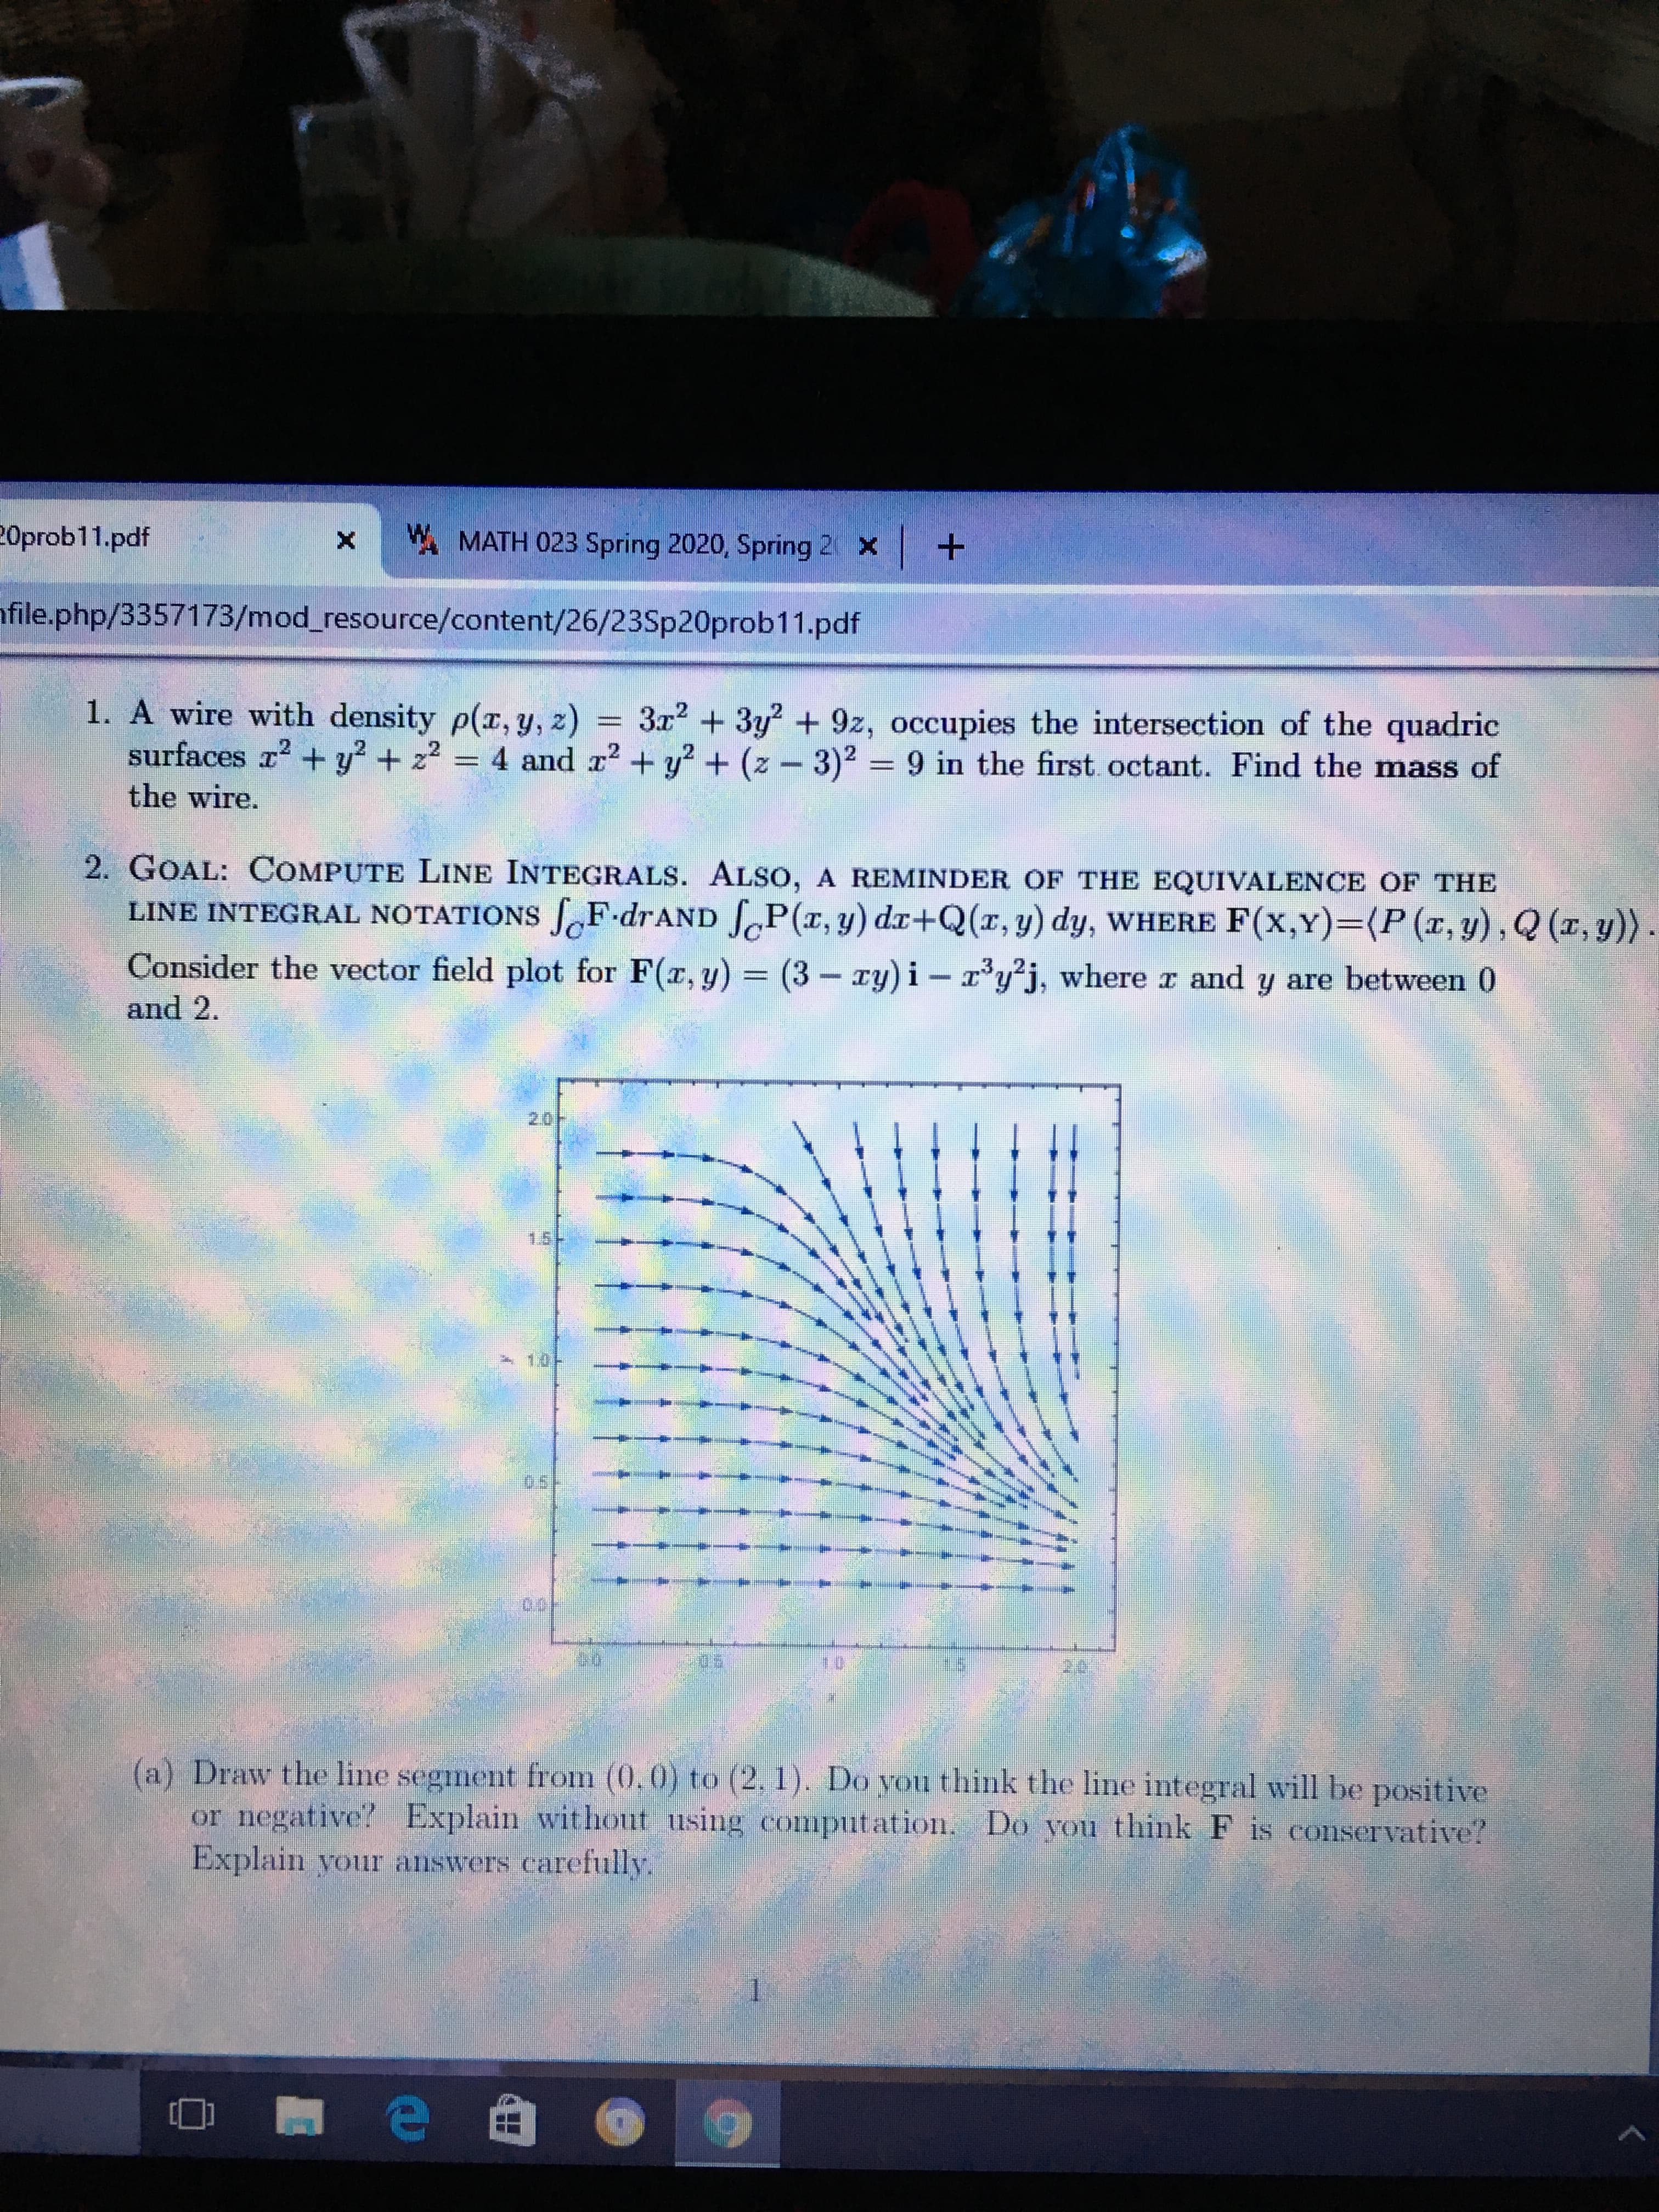 20prob11.pdf
A MATH 023 Spring 2020, Spring 2 x +
nfile.php/3357173/mod_resource/content/26/23Sp20prob11.pdf
1. A wire with density p(x, y, z)
surfaces r2 + y? + z2 = 4 and x? + y? + (z - 3)2 = 9 in the first octant. Find the mass of
3x + 3y + 9z, occupies the intersection of the quadric
=
the wire.
2. GOAL: COMPUTE LINE INTEGRALS. ALSO, A REMINDER OF THE EQUIVALENCE OF THE
LINE INTEGRAL NOTATIONS SF.drAND SP(r, y) dr+Q(r, y) dy, WHERE F(x,Y)=D(P(x,y),Q (x, y)) .
Consider the vector field plot for F(r, y) = (3-ry) i- r'y*j, where r and y are between 0
and 2.
20
1.5-
os/-
(a) Draw the line segment from (0,0) to (2, 1). Do you think the line integral will be positive
or negative? Explain withont using computation. Do you think F is conservative?
Explain your answers carefully.
